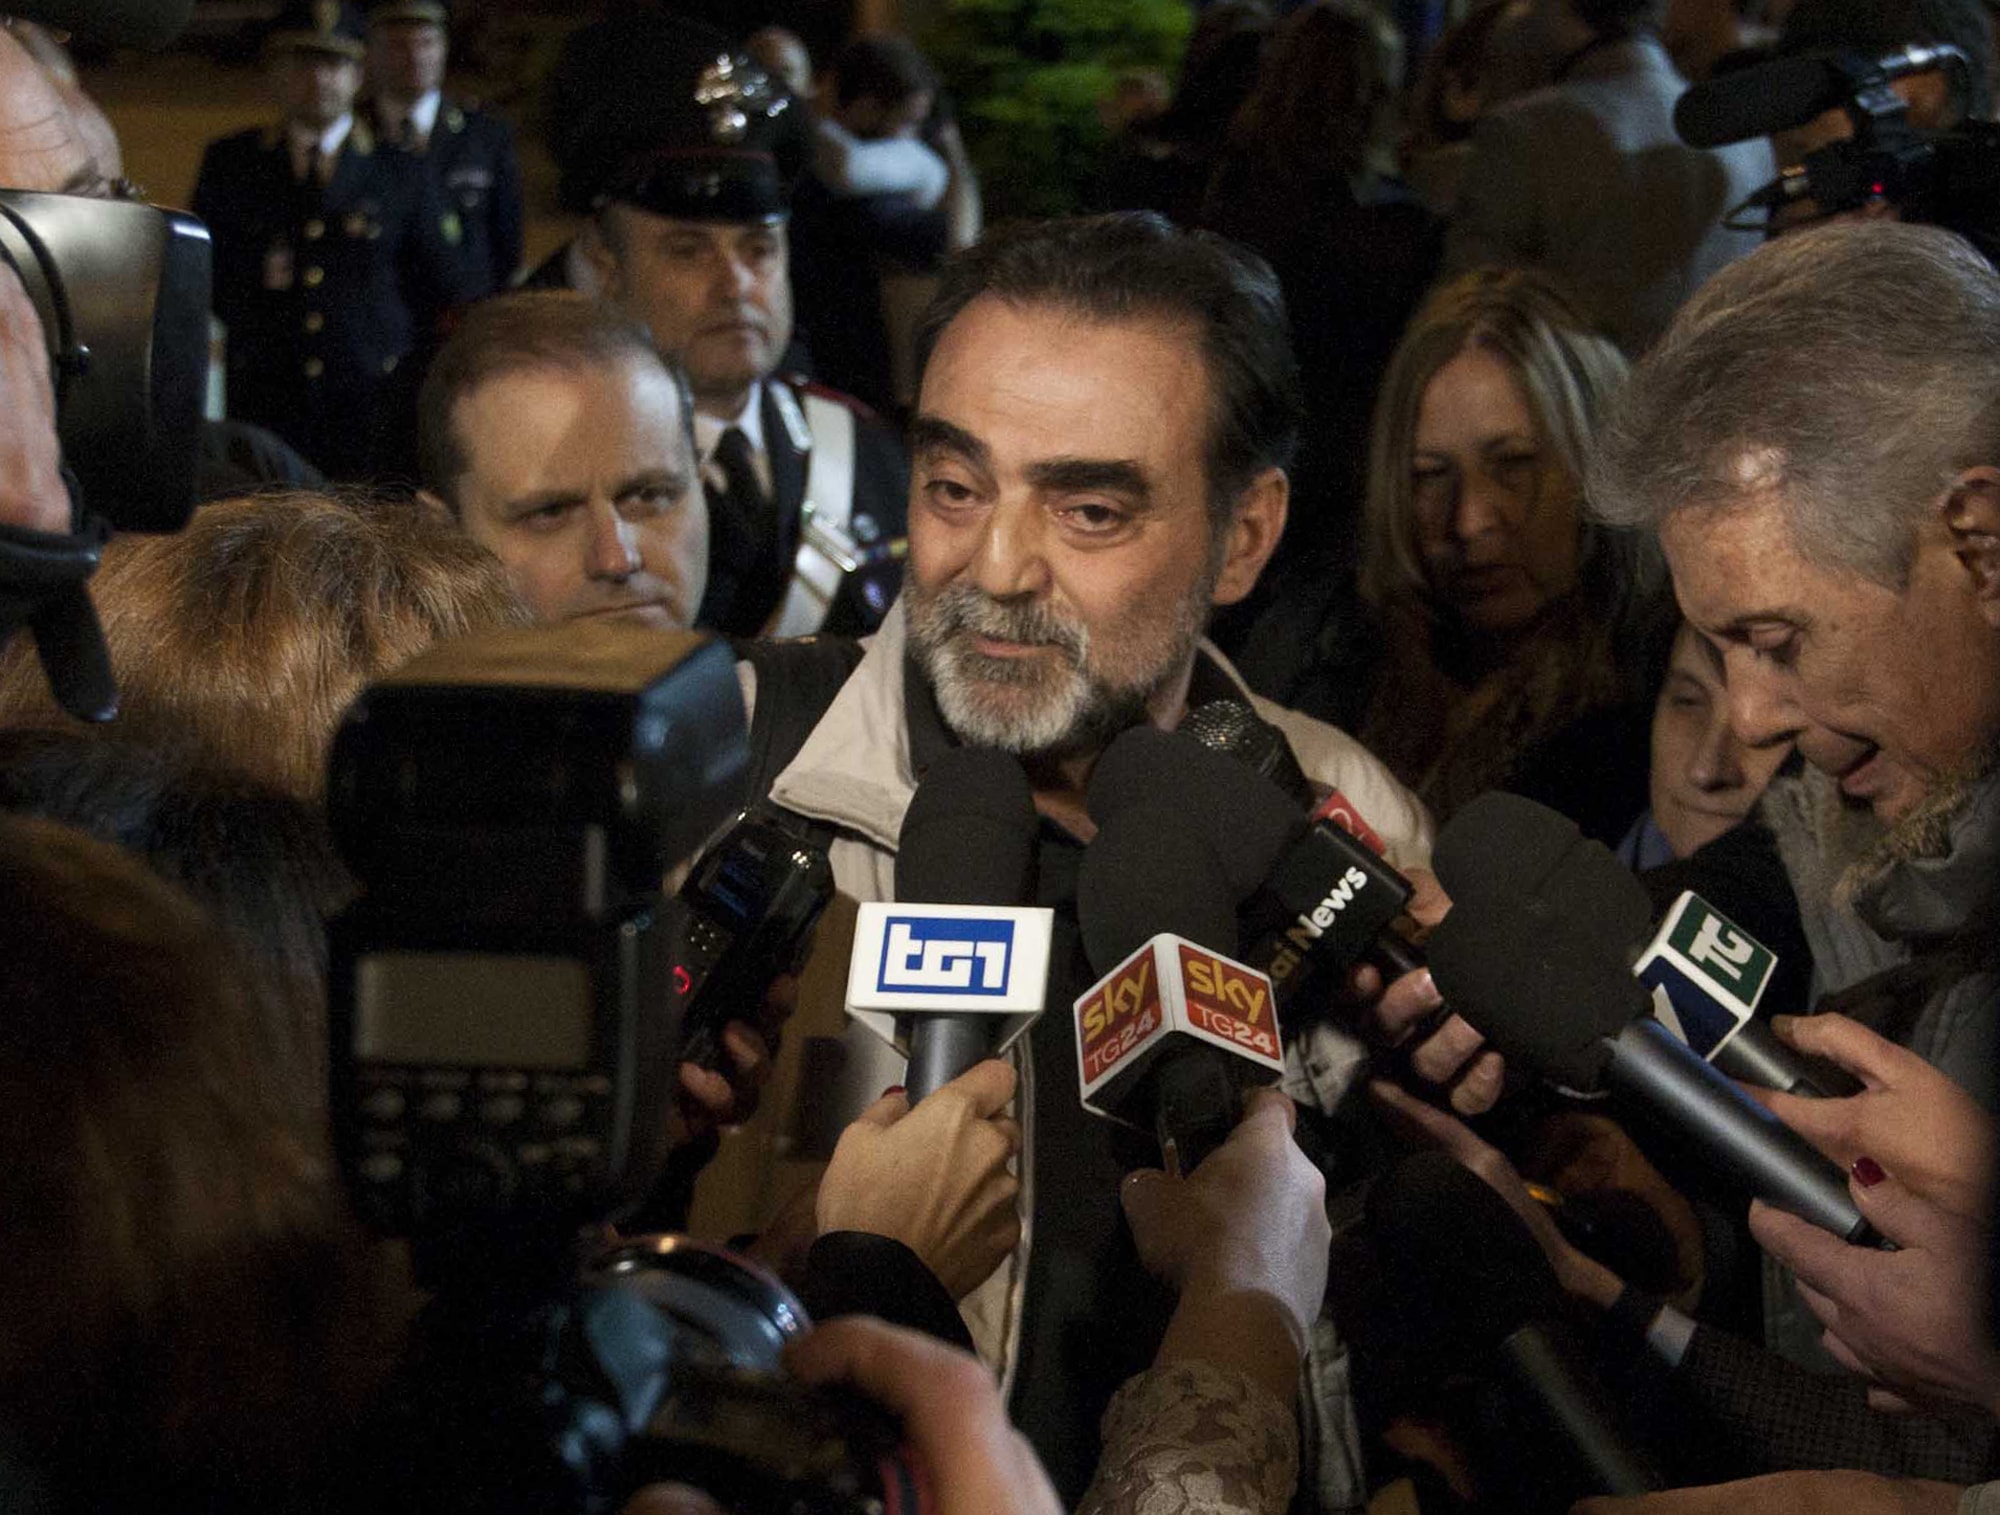 Italian journalist Amedeo Ricucci, who had been detained since 4 April, receives media attention as he arrives at the airport in Rome on 13 April 2013